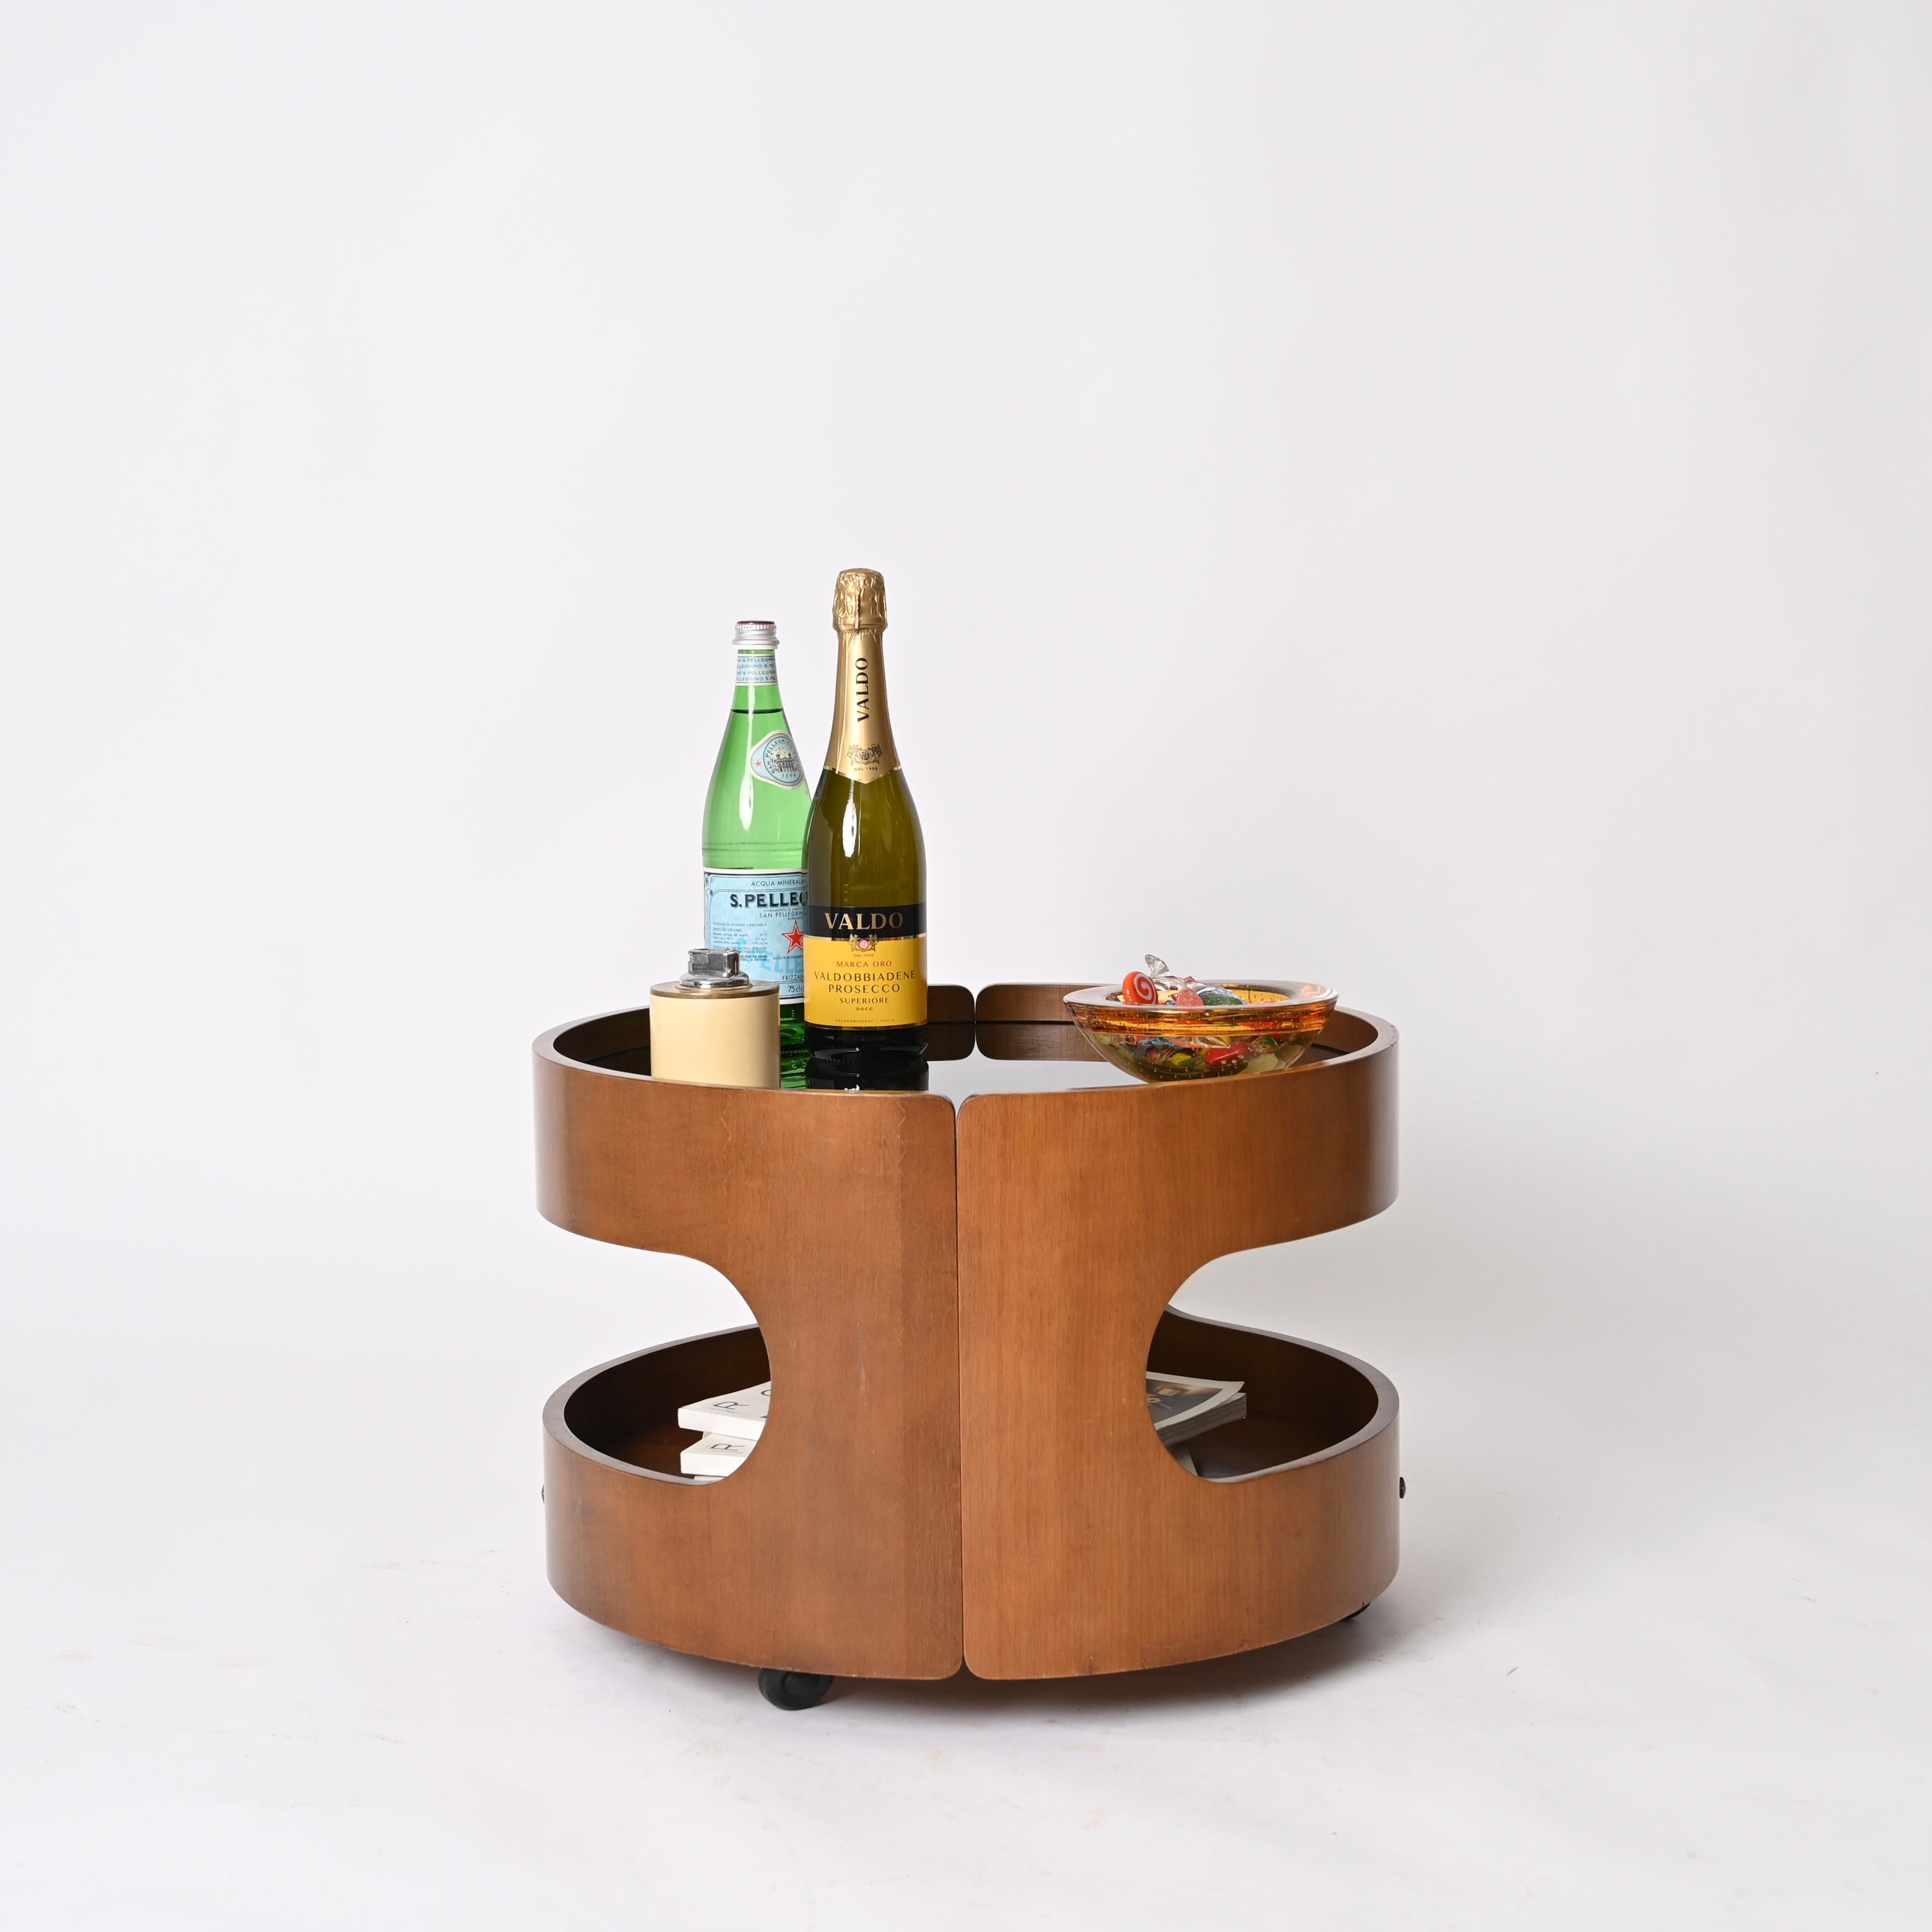 20th Century Midcentury Italian Bent Plywood Coffee Table with Wheels by Molteni, 1970s For Sale